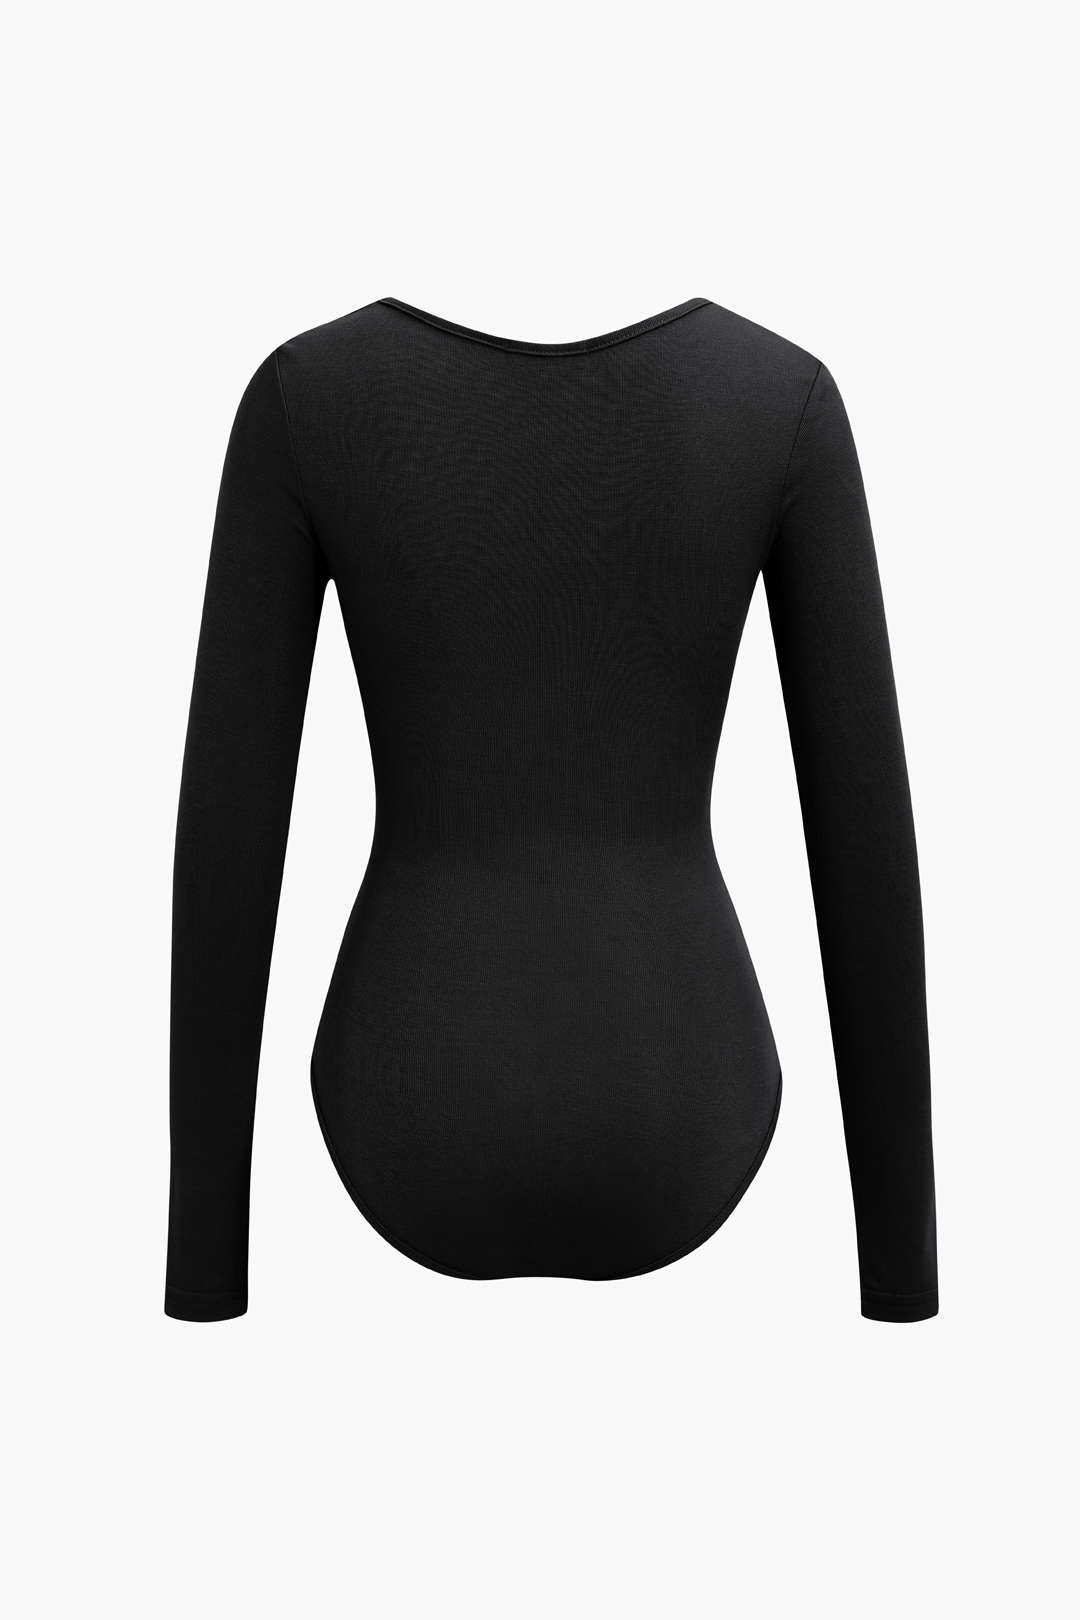 Long Sleeve O-ring Cut Out Bodysuit